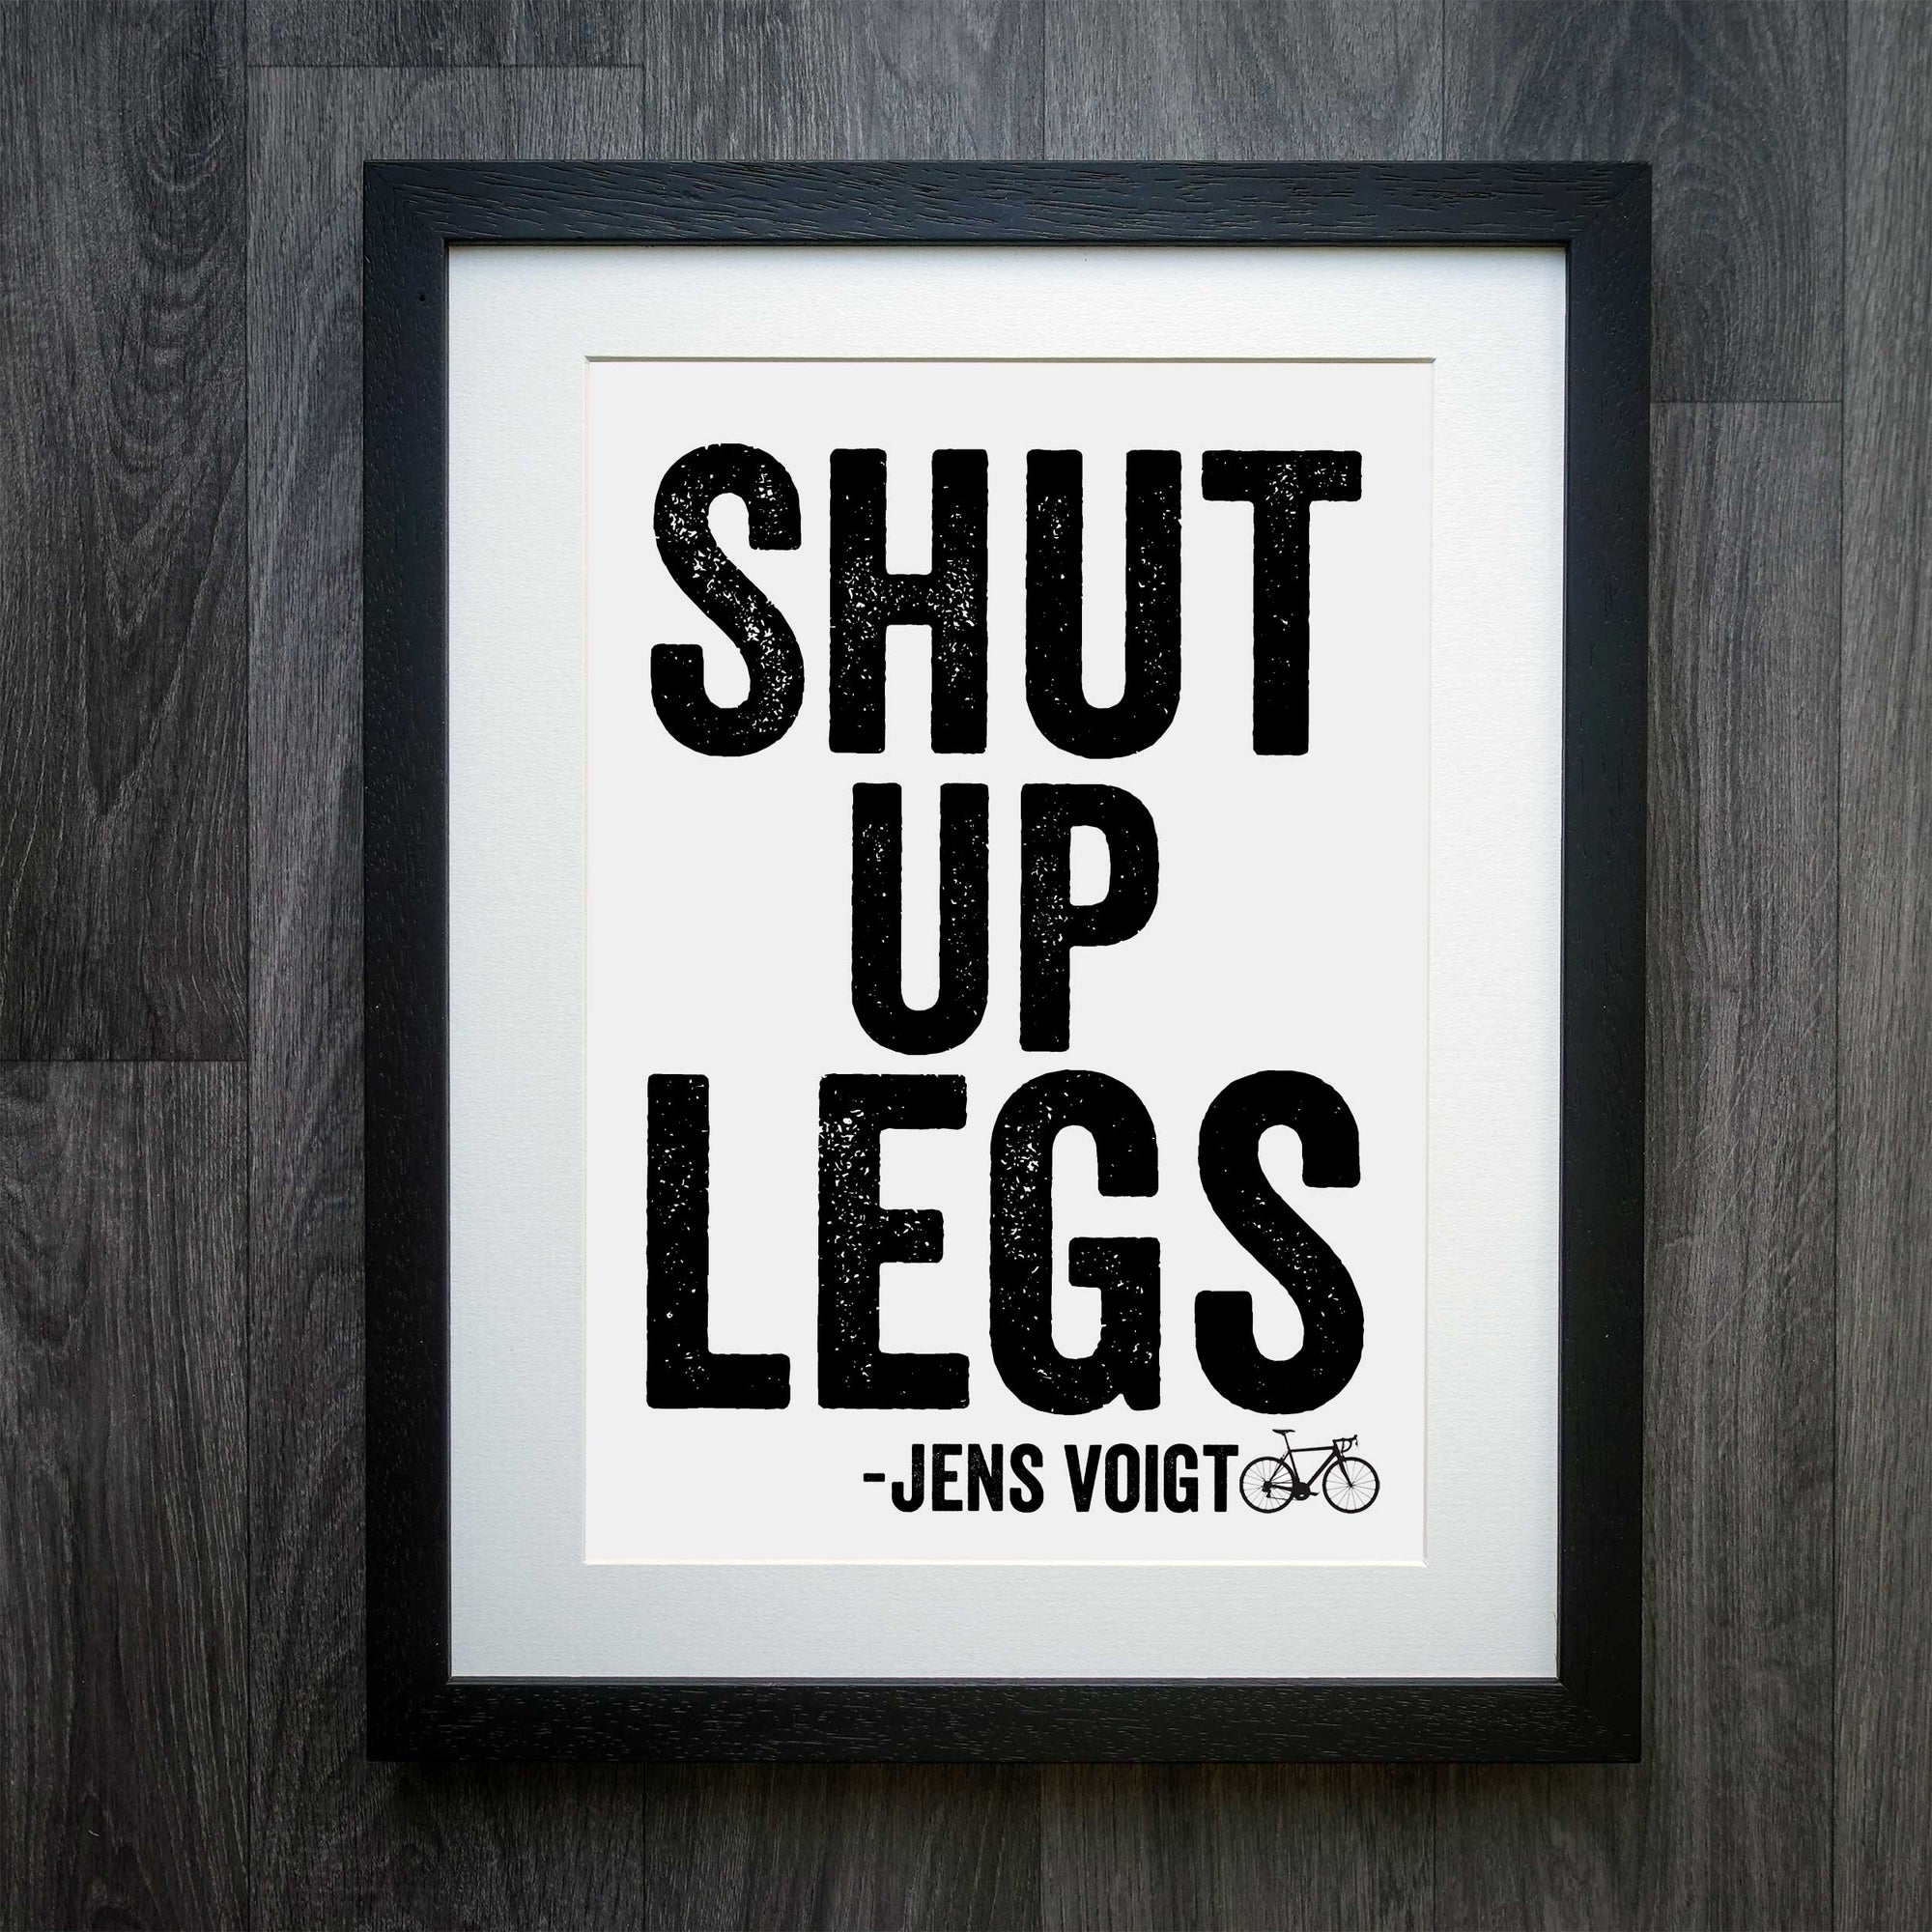 Jens Voigt 'Shut Up Legs' Cycling Print - Inspiring Grit and Perseverance